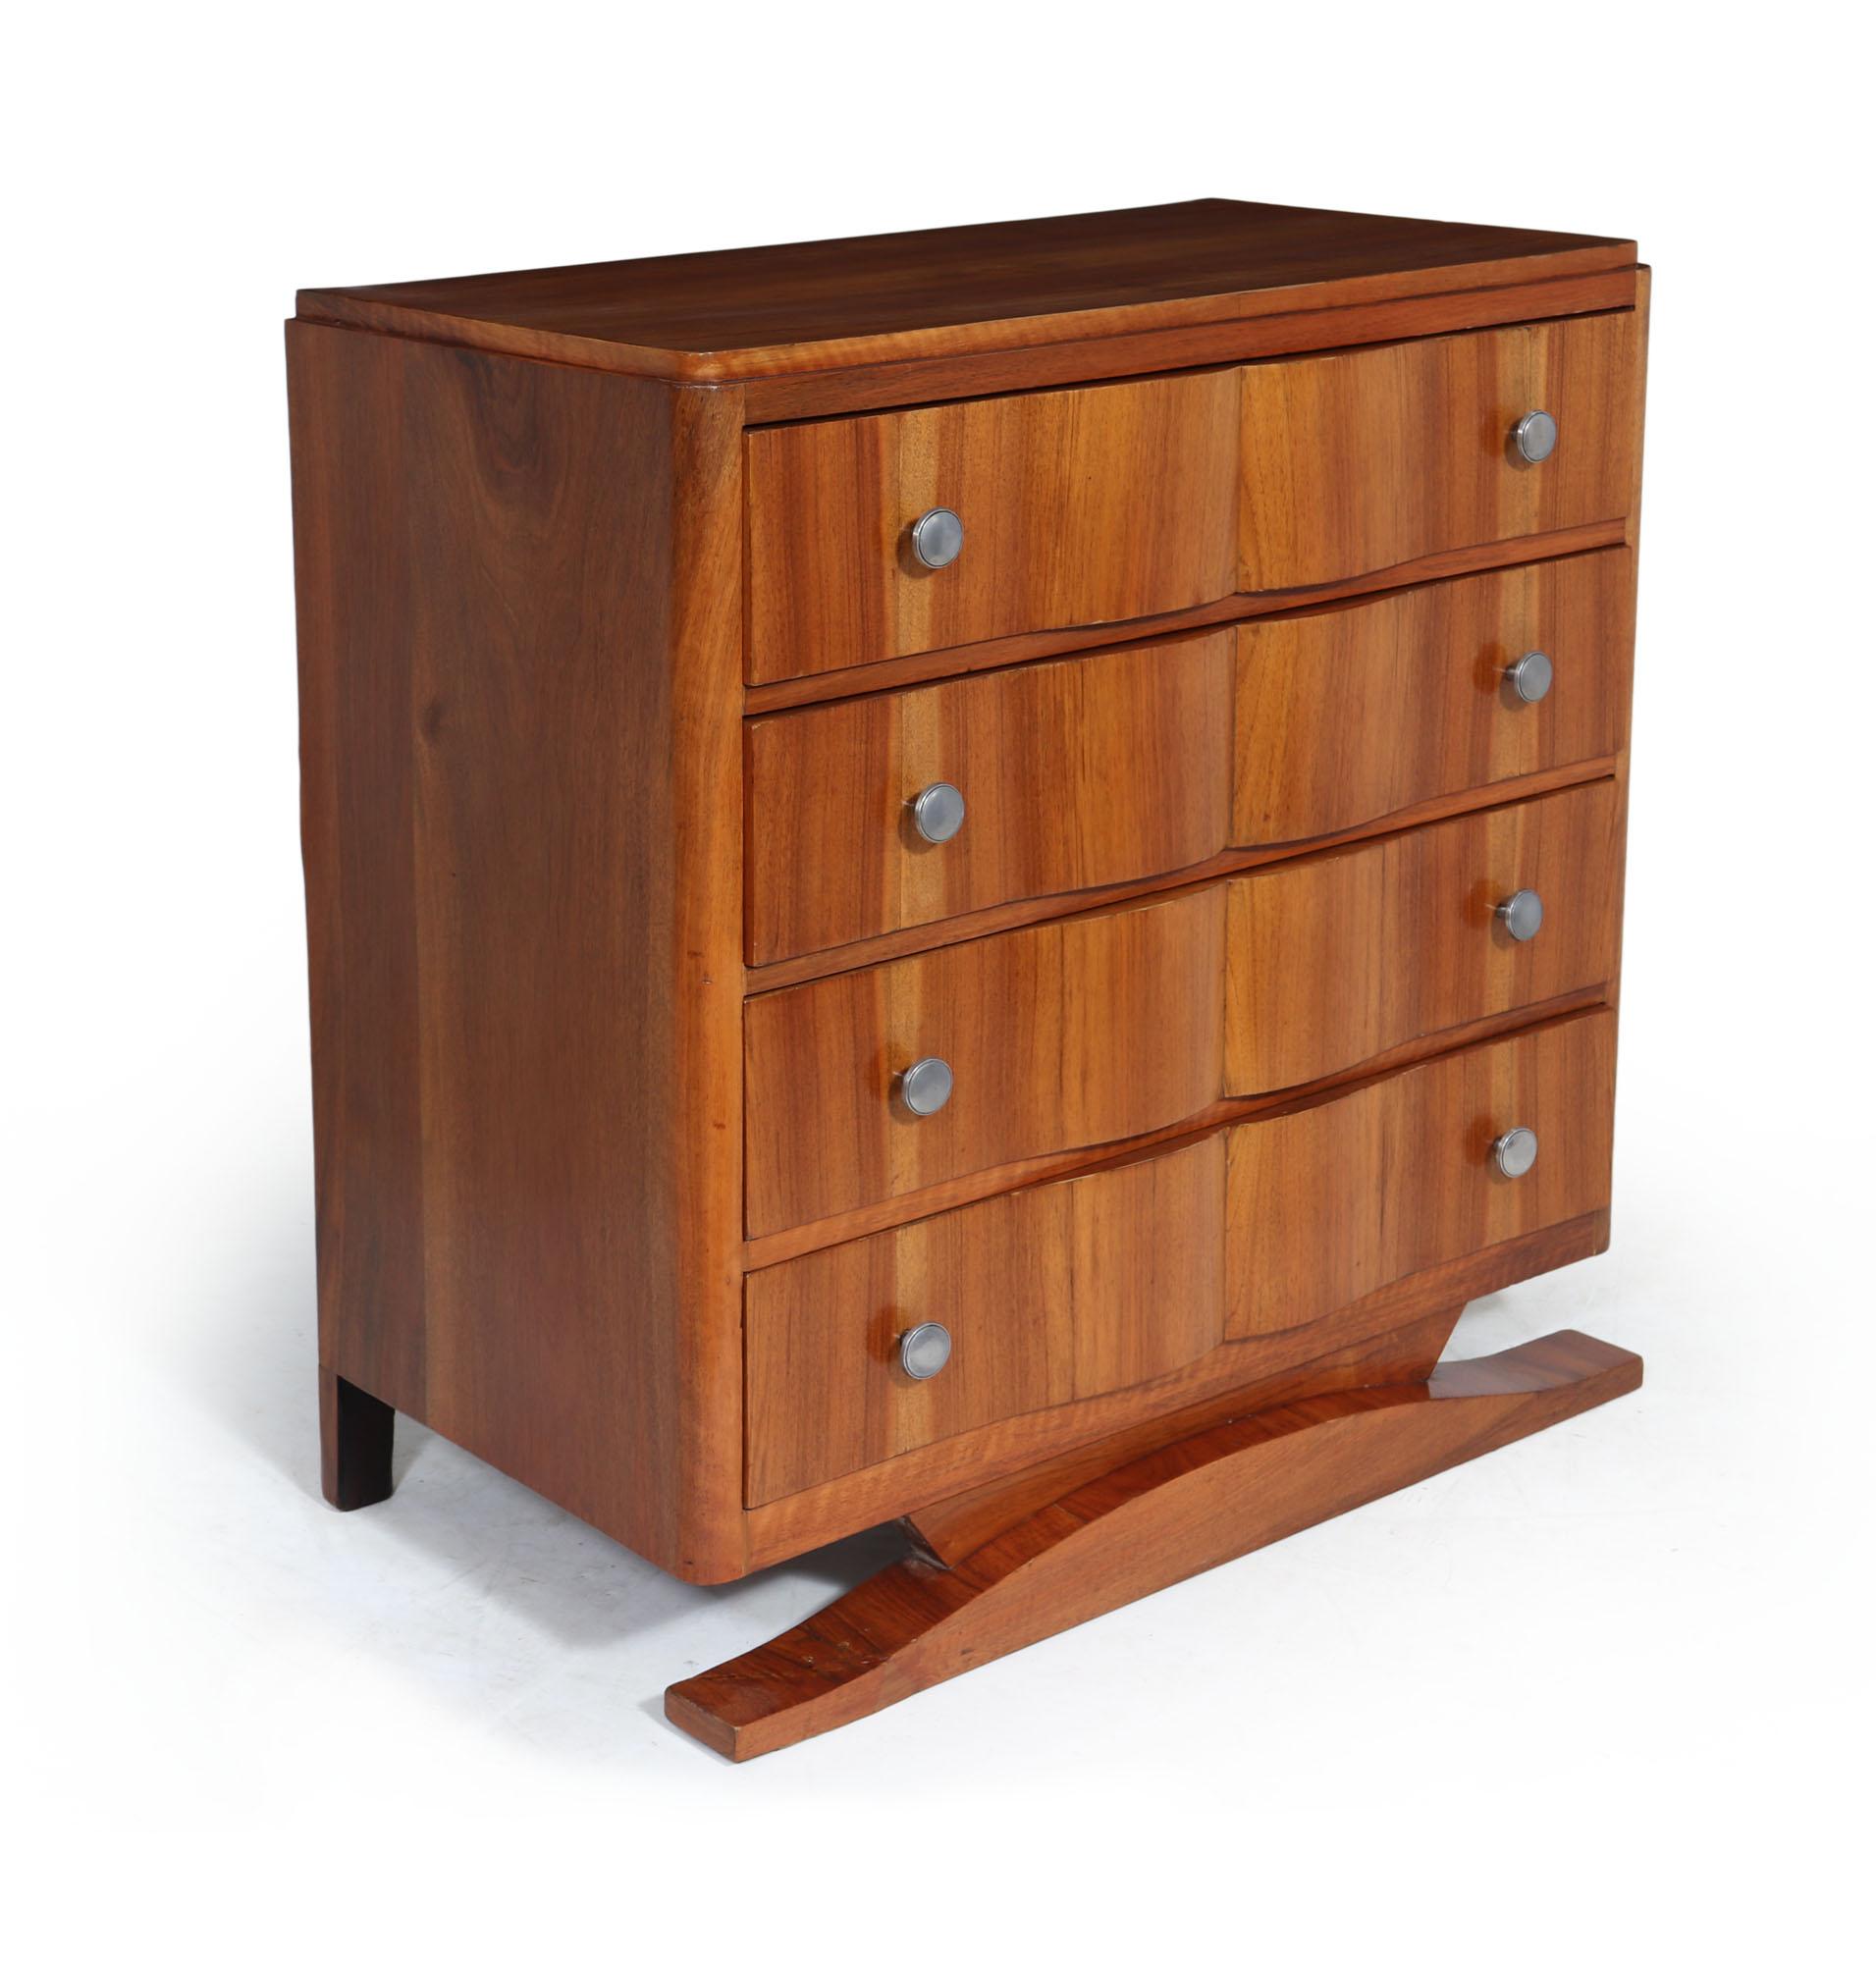 Mid-20th Century French Art Deco Walnut Chest of Drawers For Sale